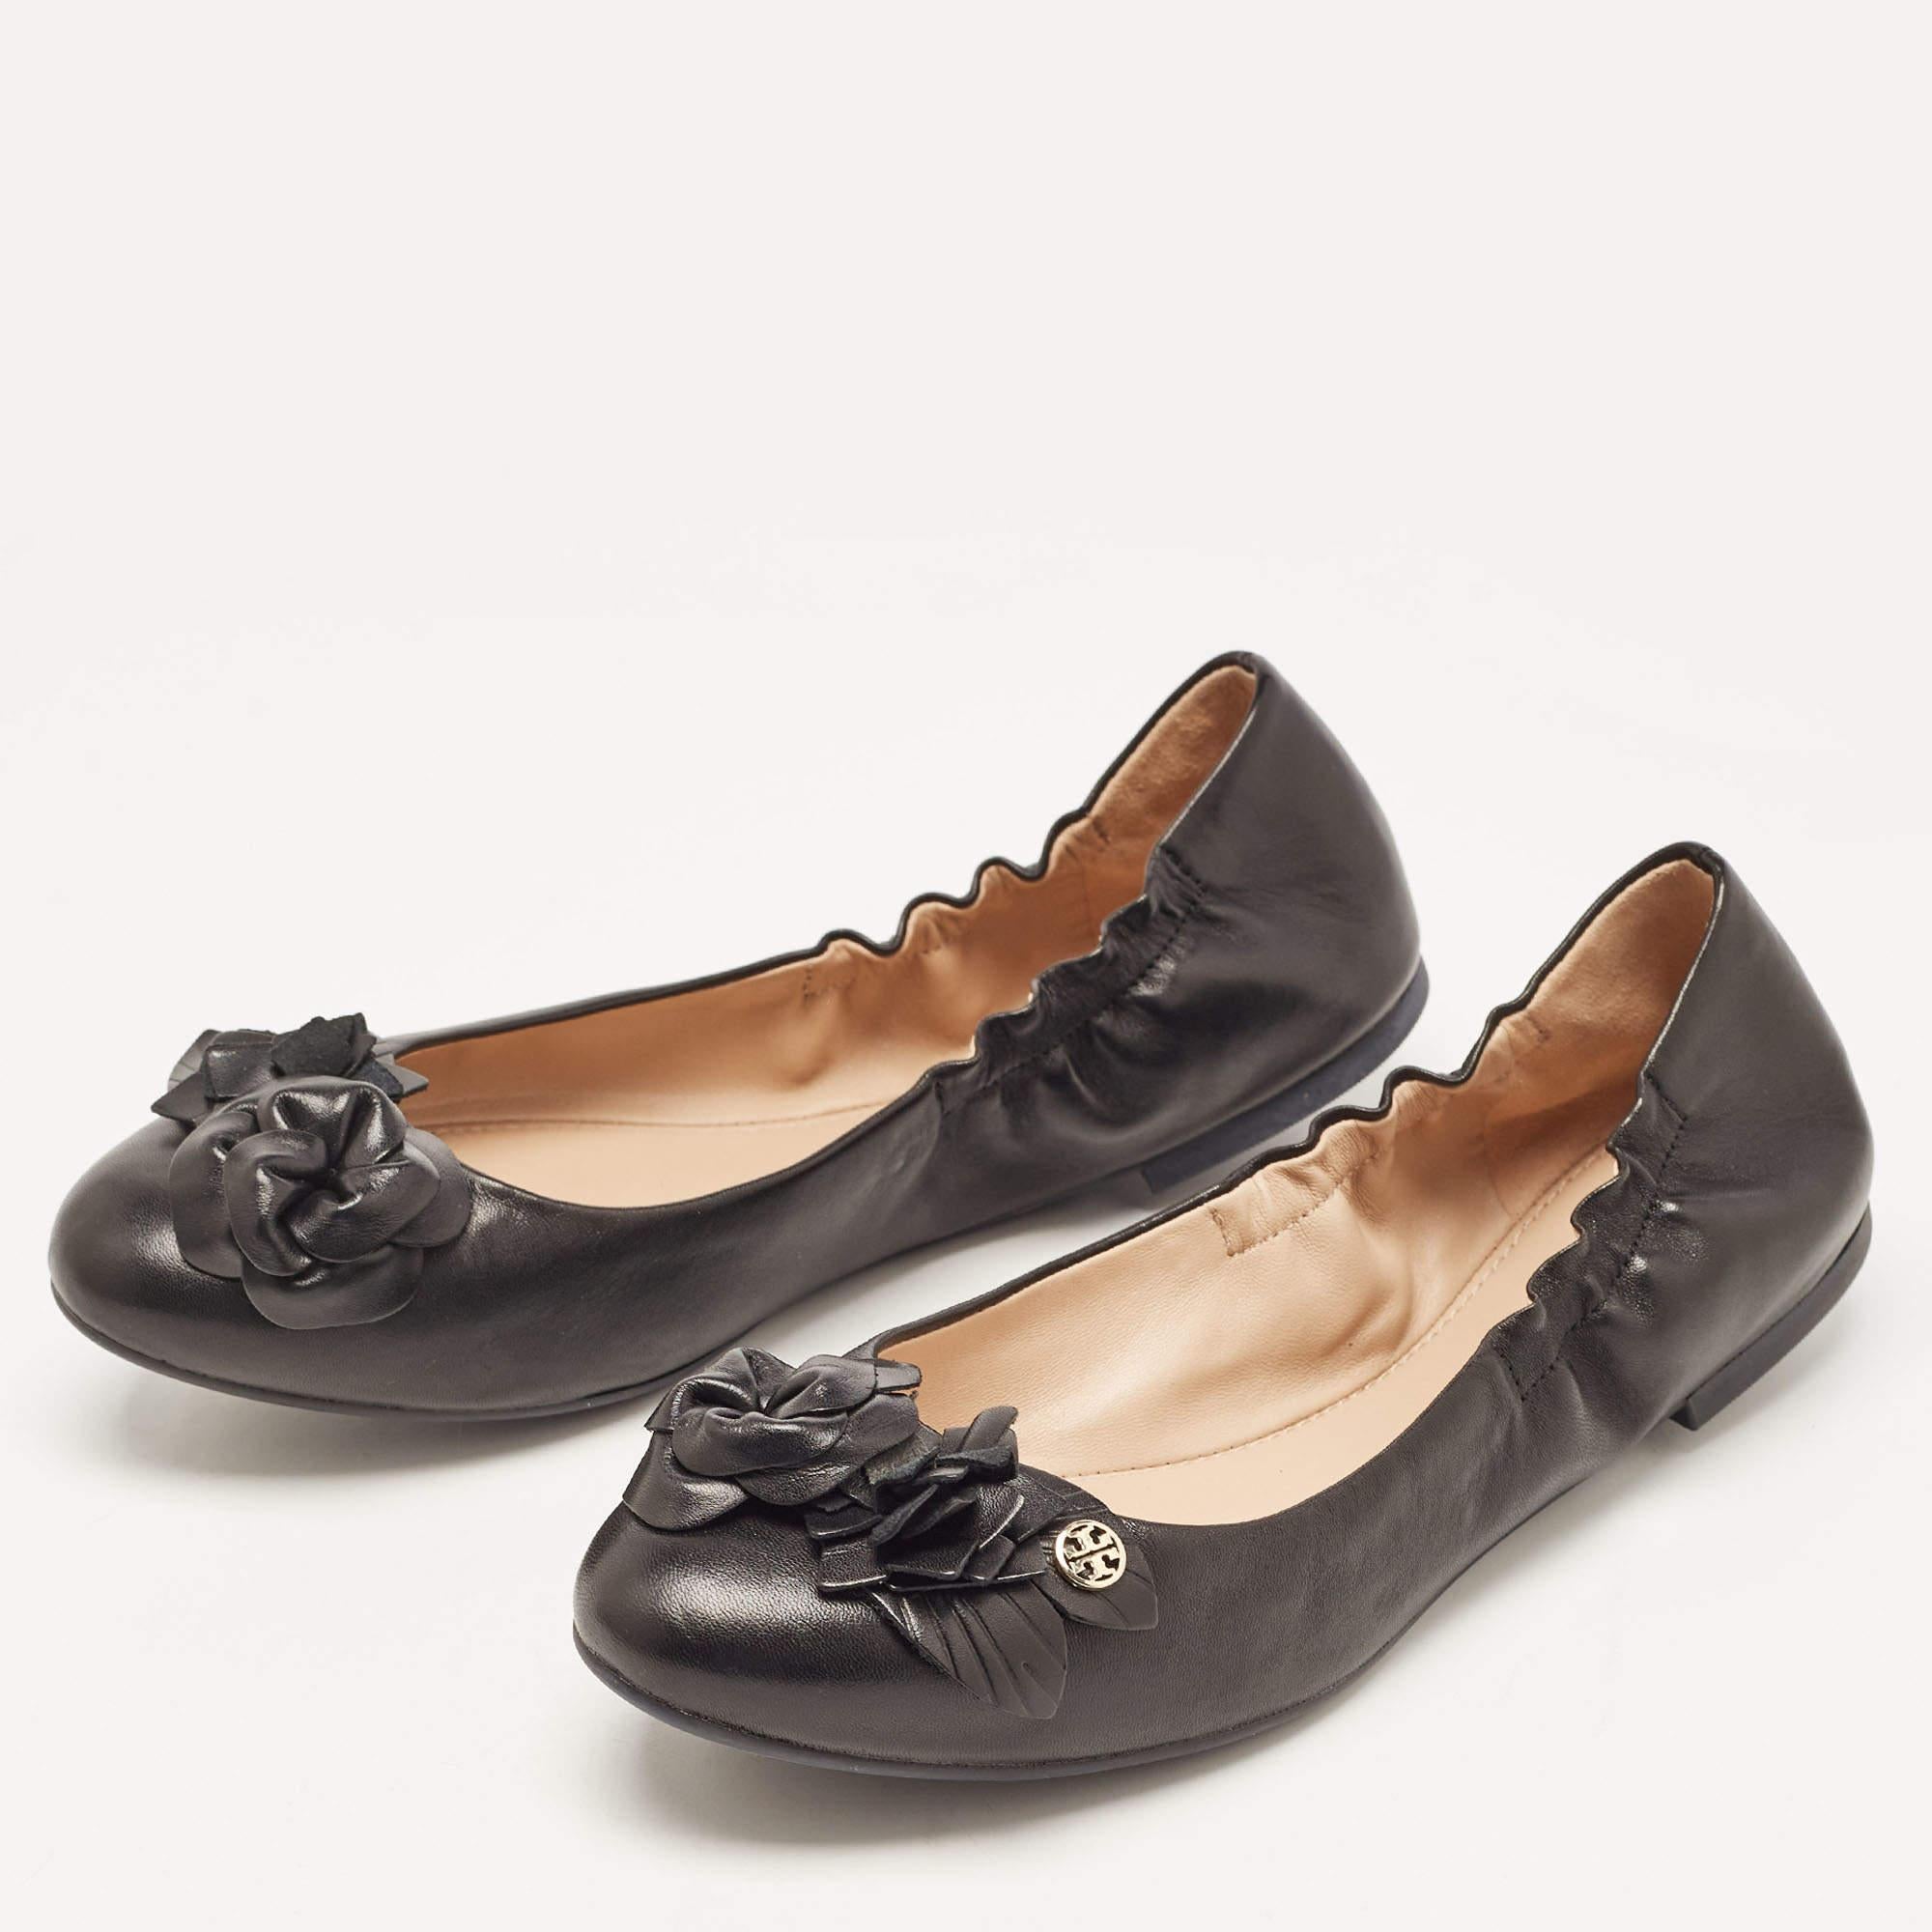 Tory Burch Black Leather Blossom Ballet Flats Size 39.5 For Sale 2